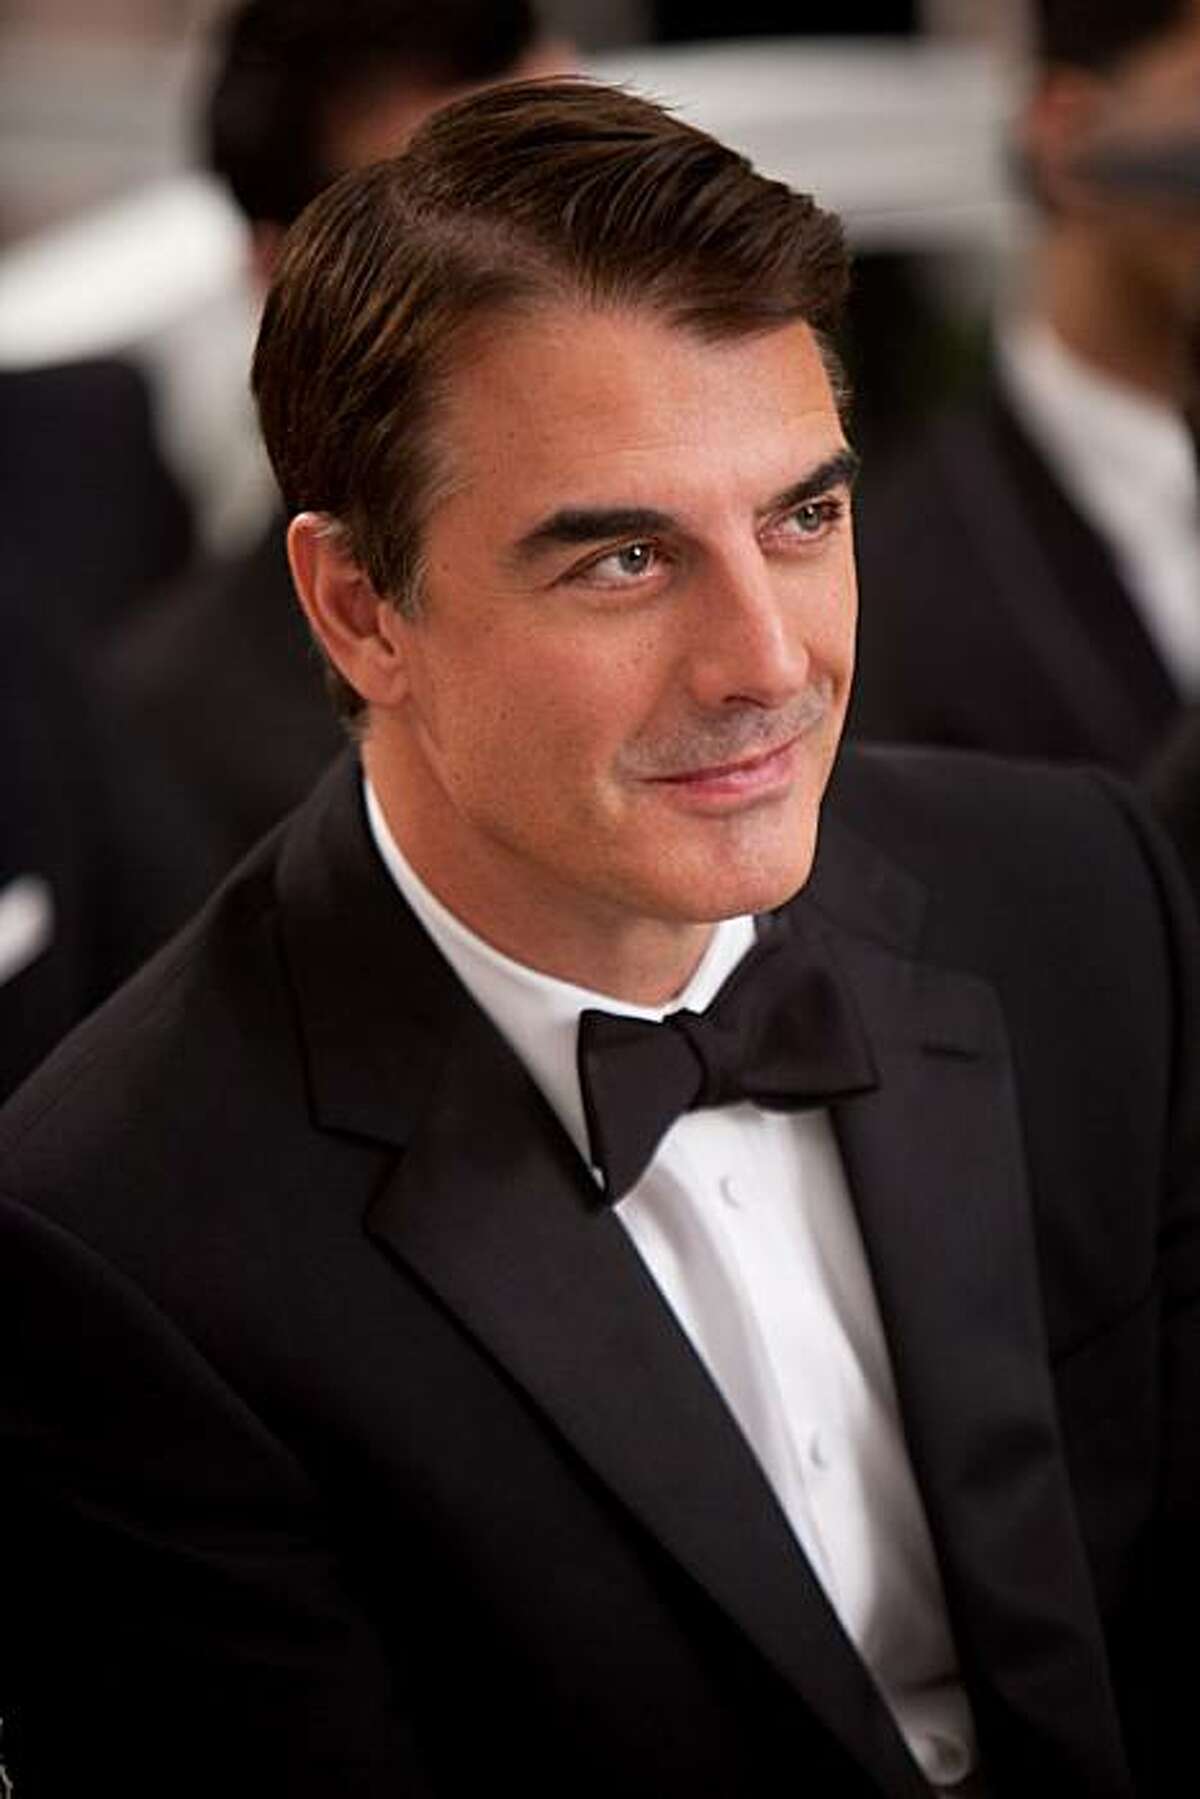 Chris Noth as Mr. Big in "Sex and the City 2"